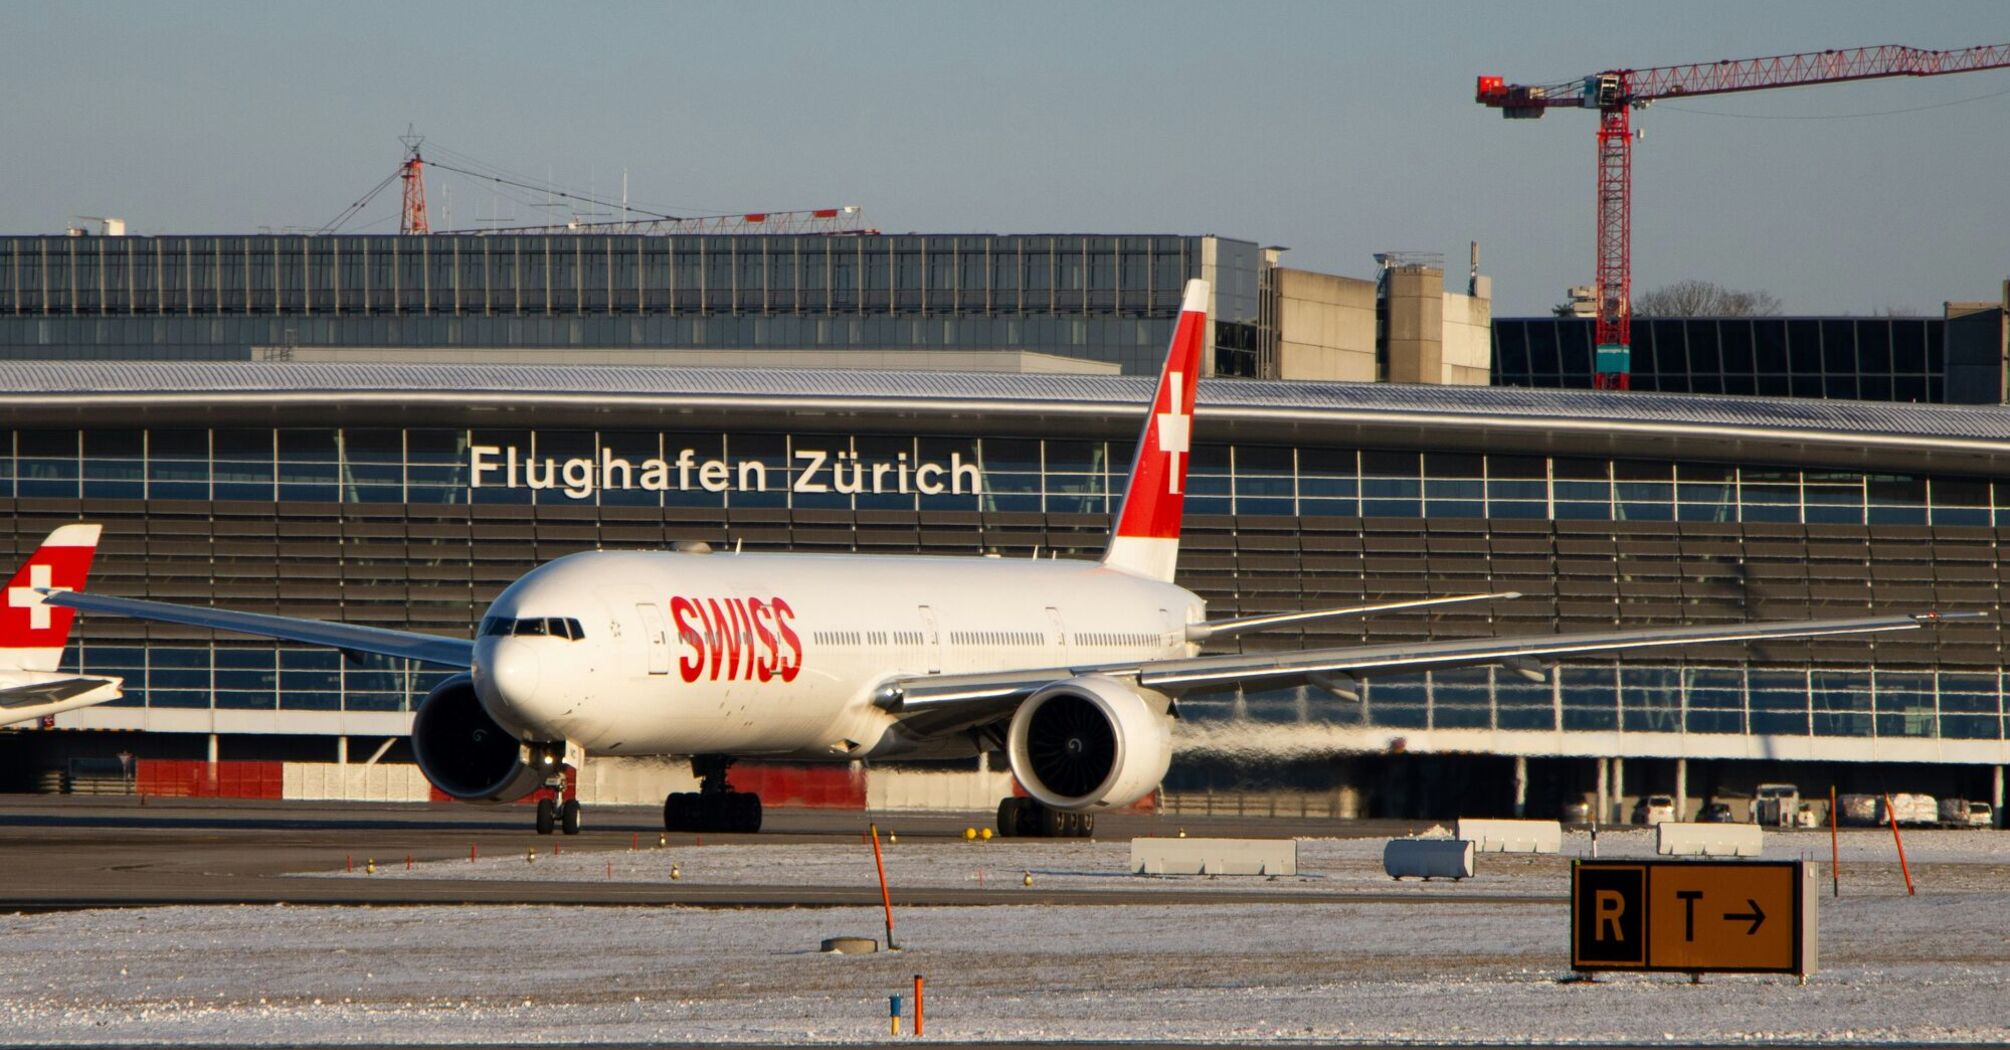 White and red Swiss Boeing 777 on airport during daytime